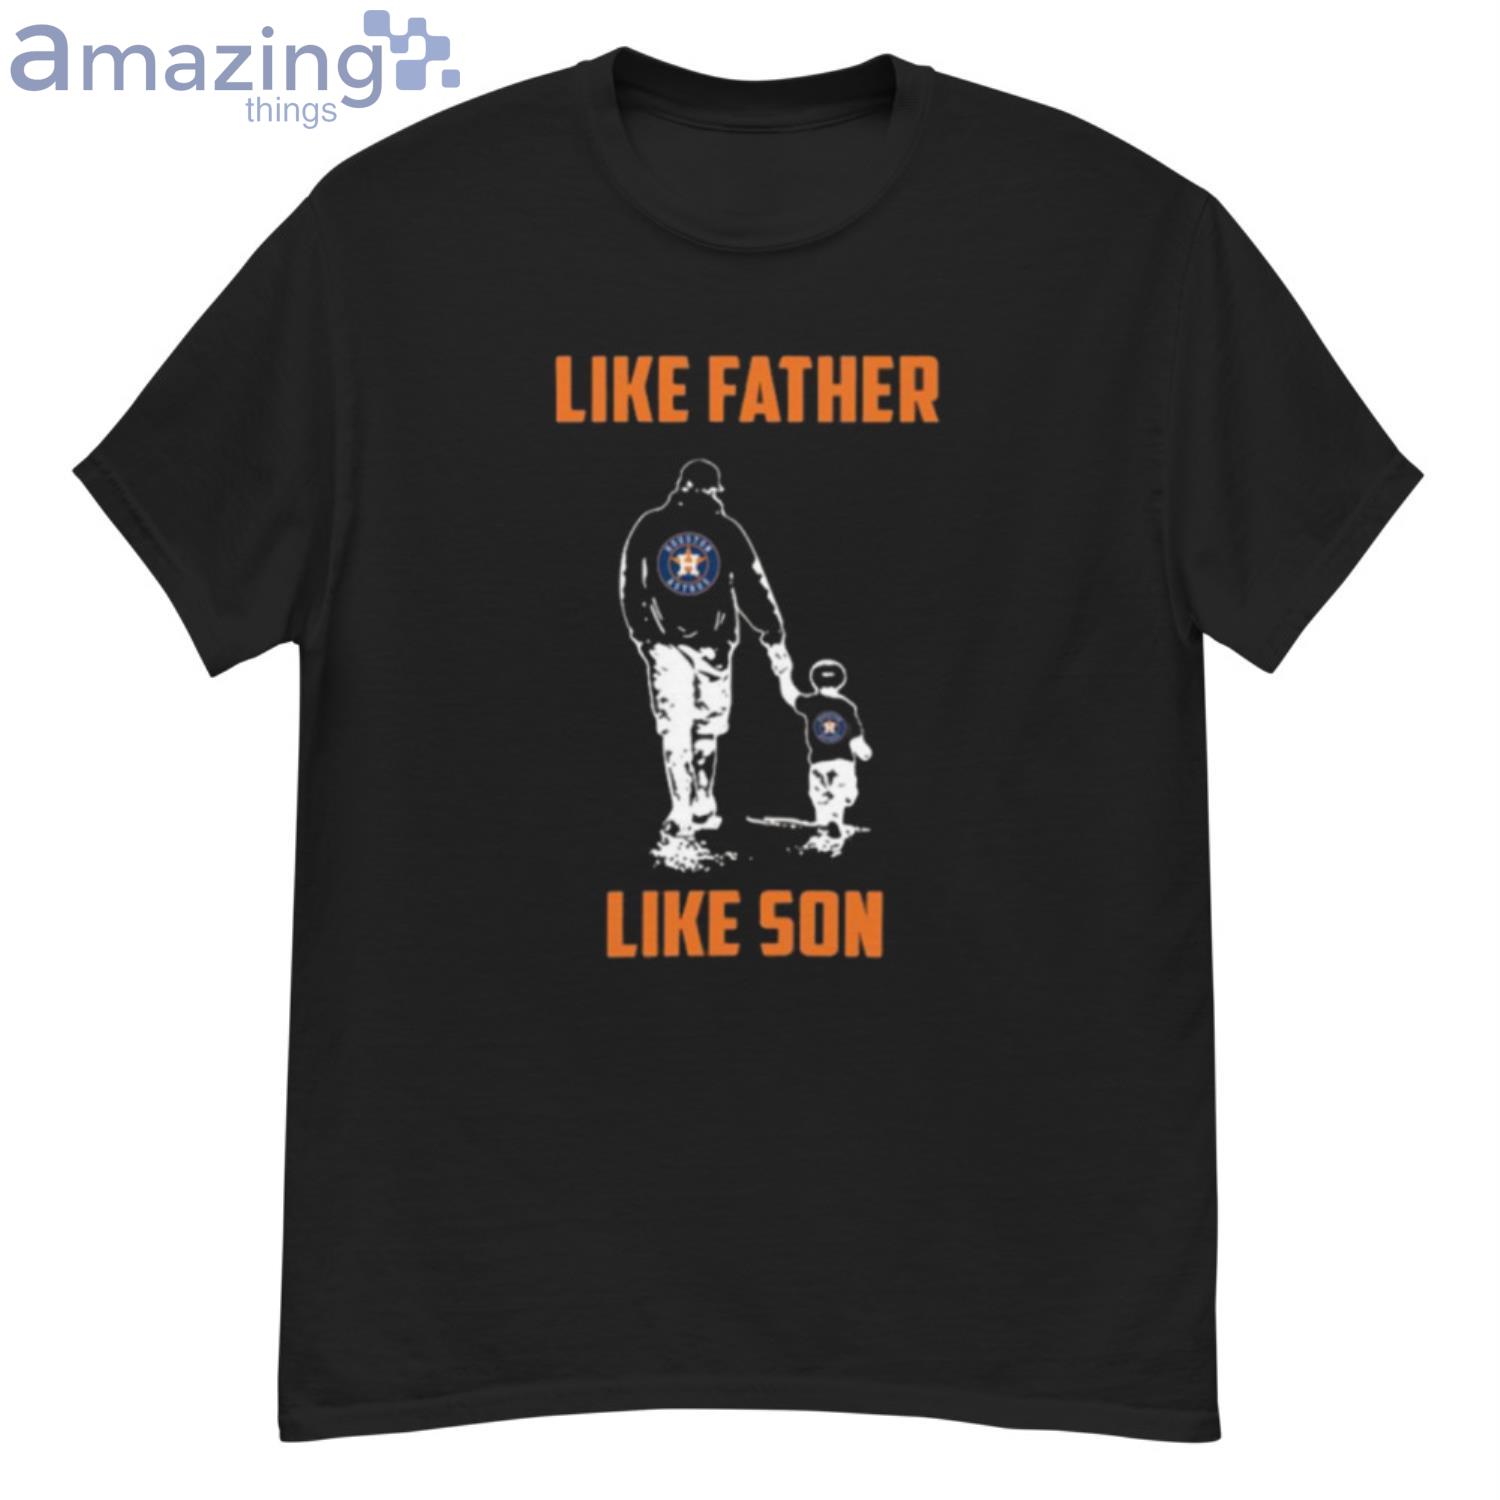 astros fathers day shirt